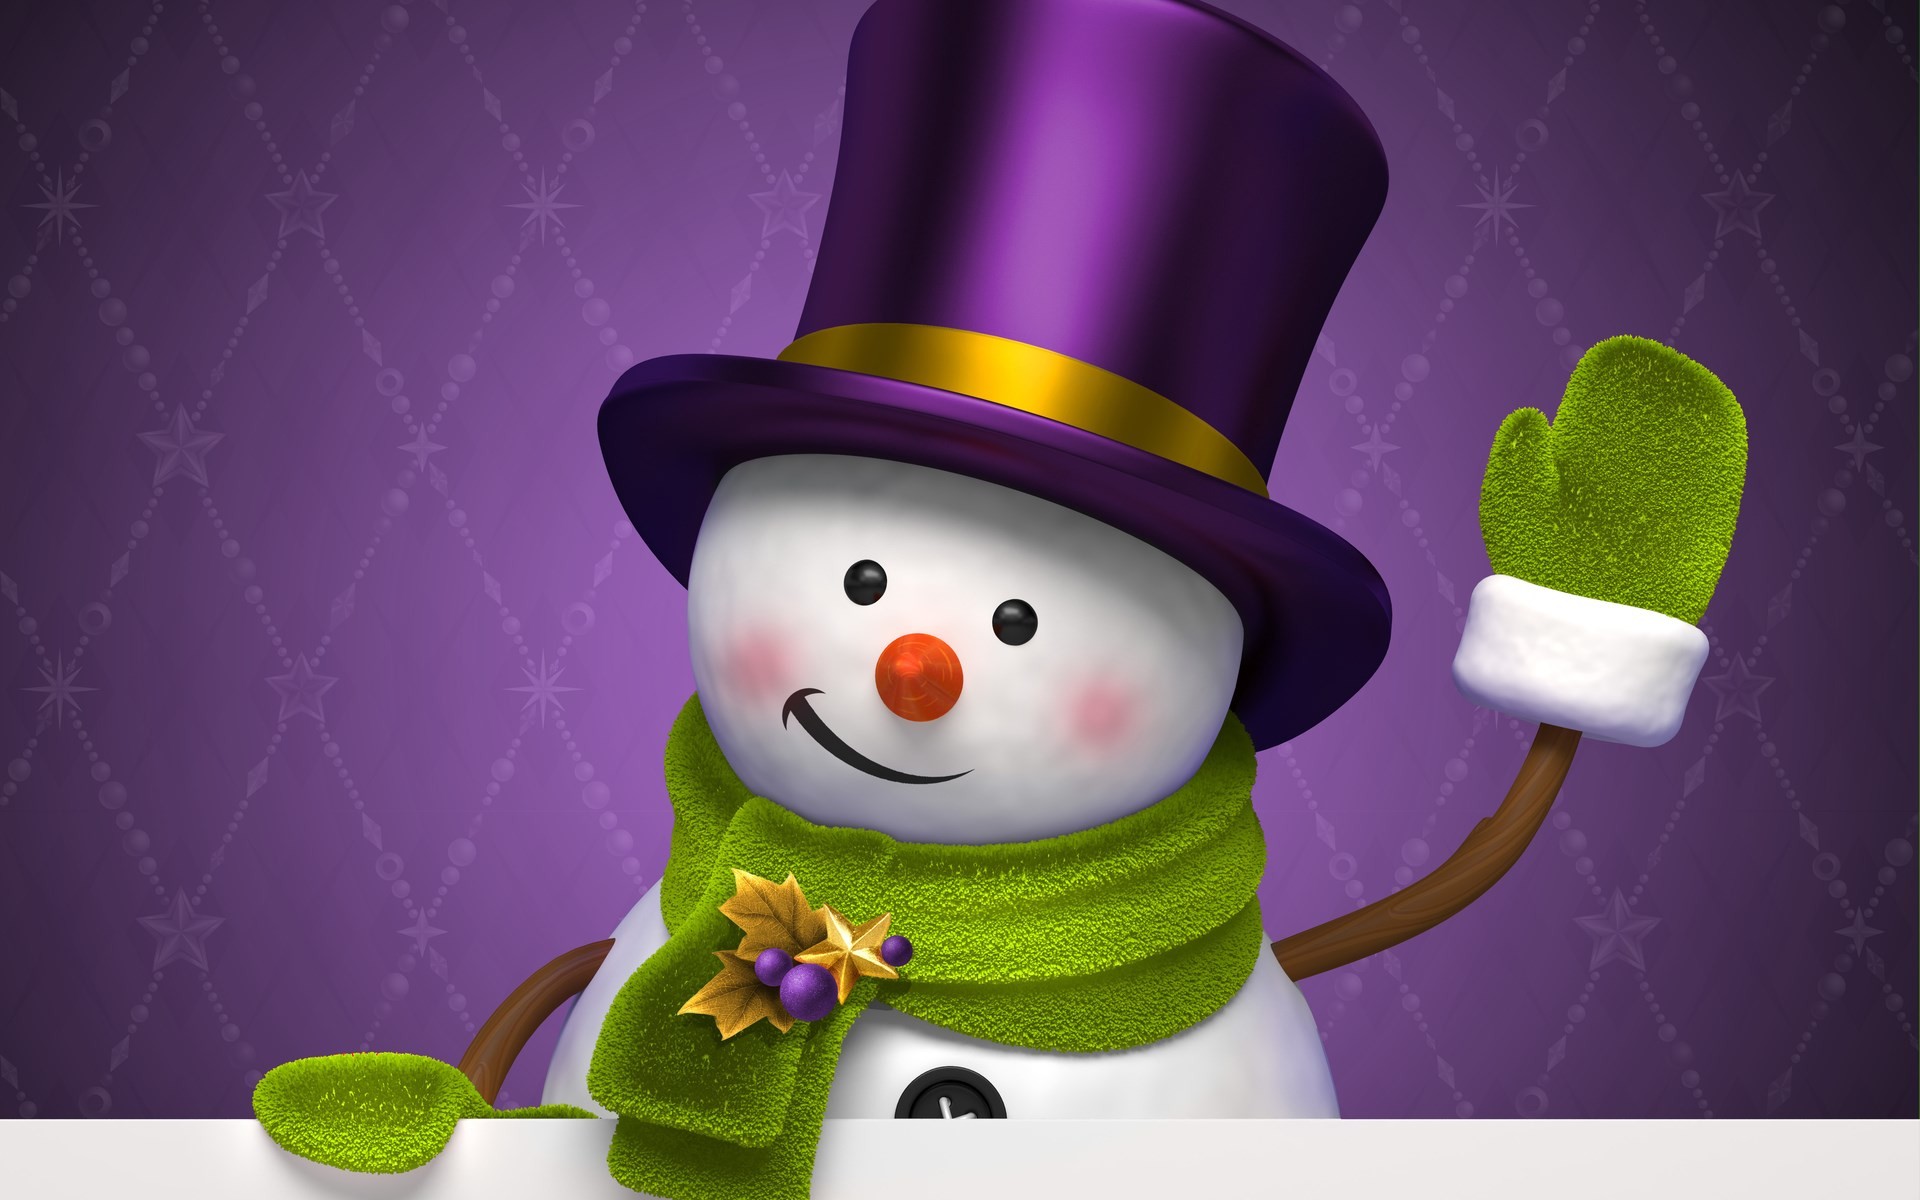 1920x1200 snowman image - Full HD Backgrounds,  (258 kB)